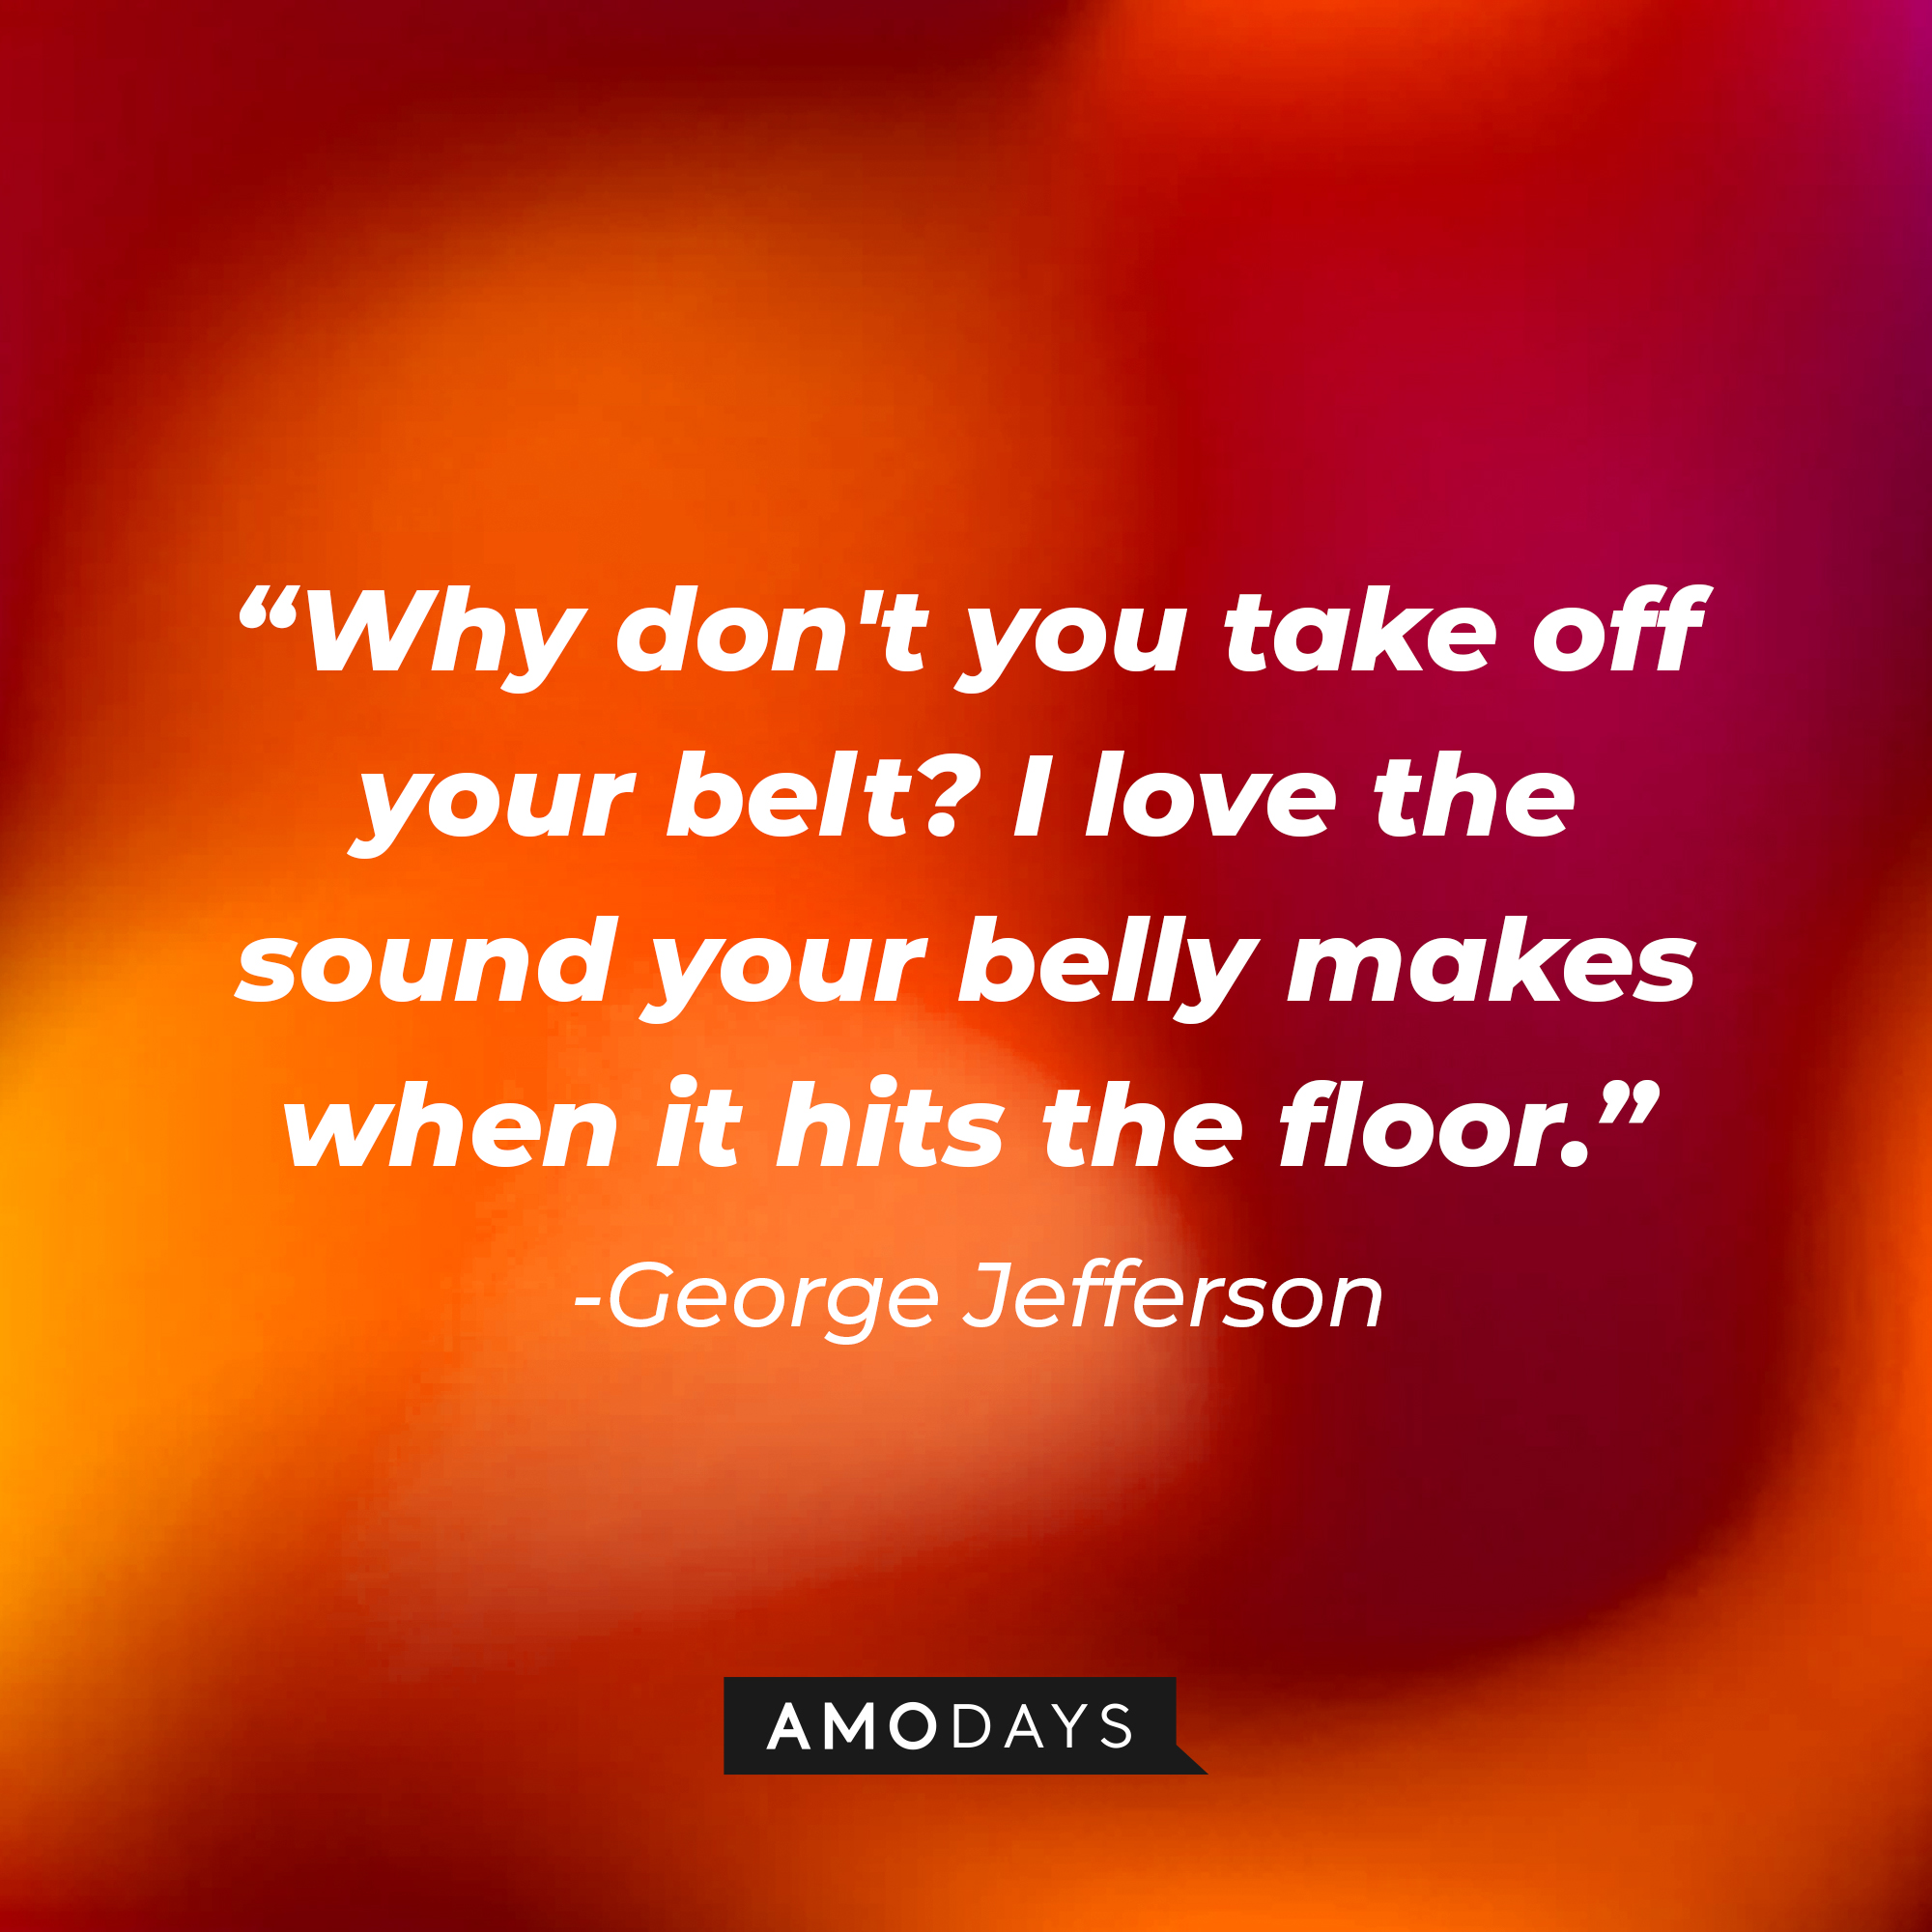 George Jefferson’s quote: “Why don't you take off your belt? I love the sound your belly makes when it hits the floor.” | Source: AmoDays